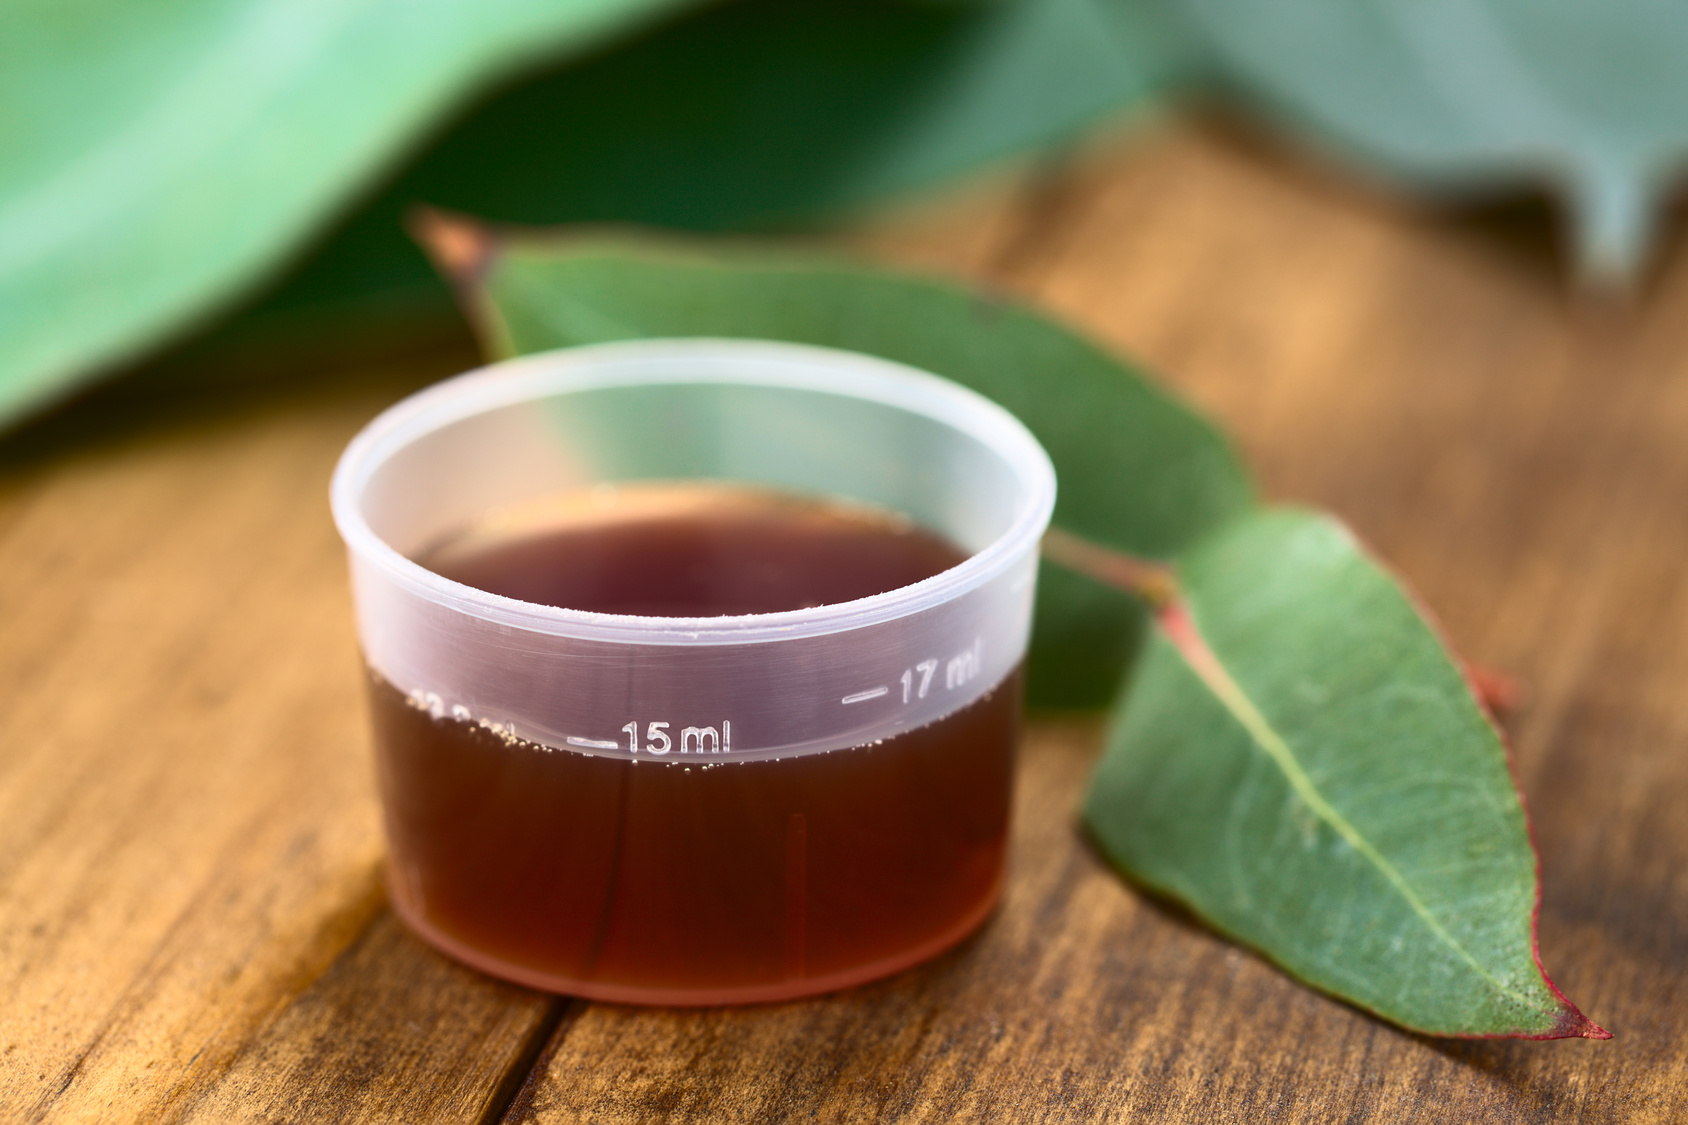 Eucalyptus cough syrup in medicine cup with fresh Eucalyptus leaves (Selective Focus, Focus on the 15ml sign on the cup)